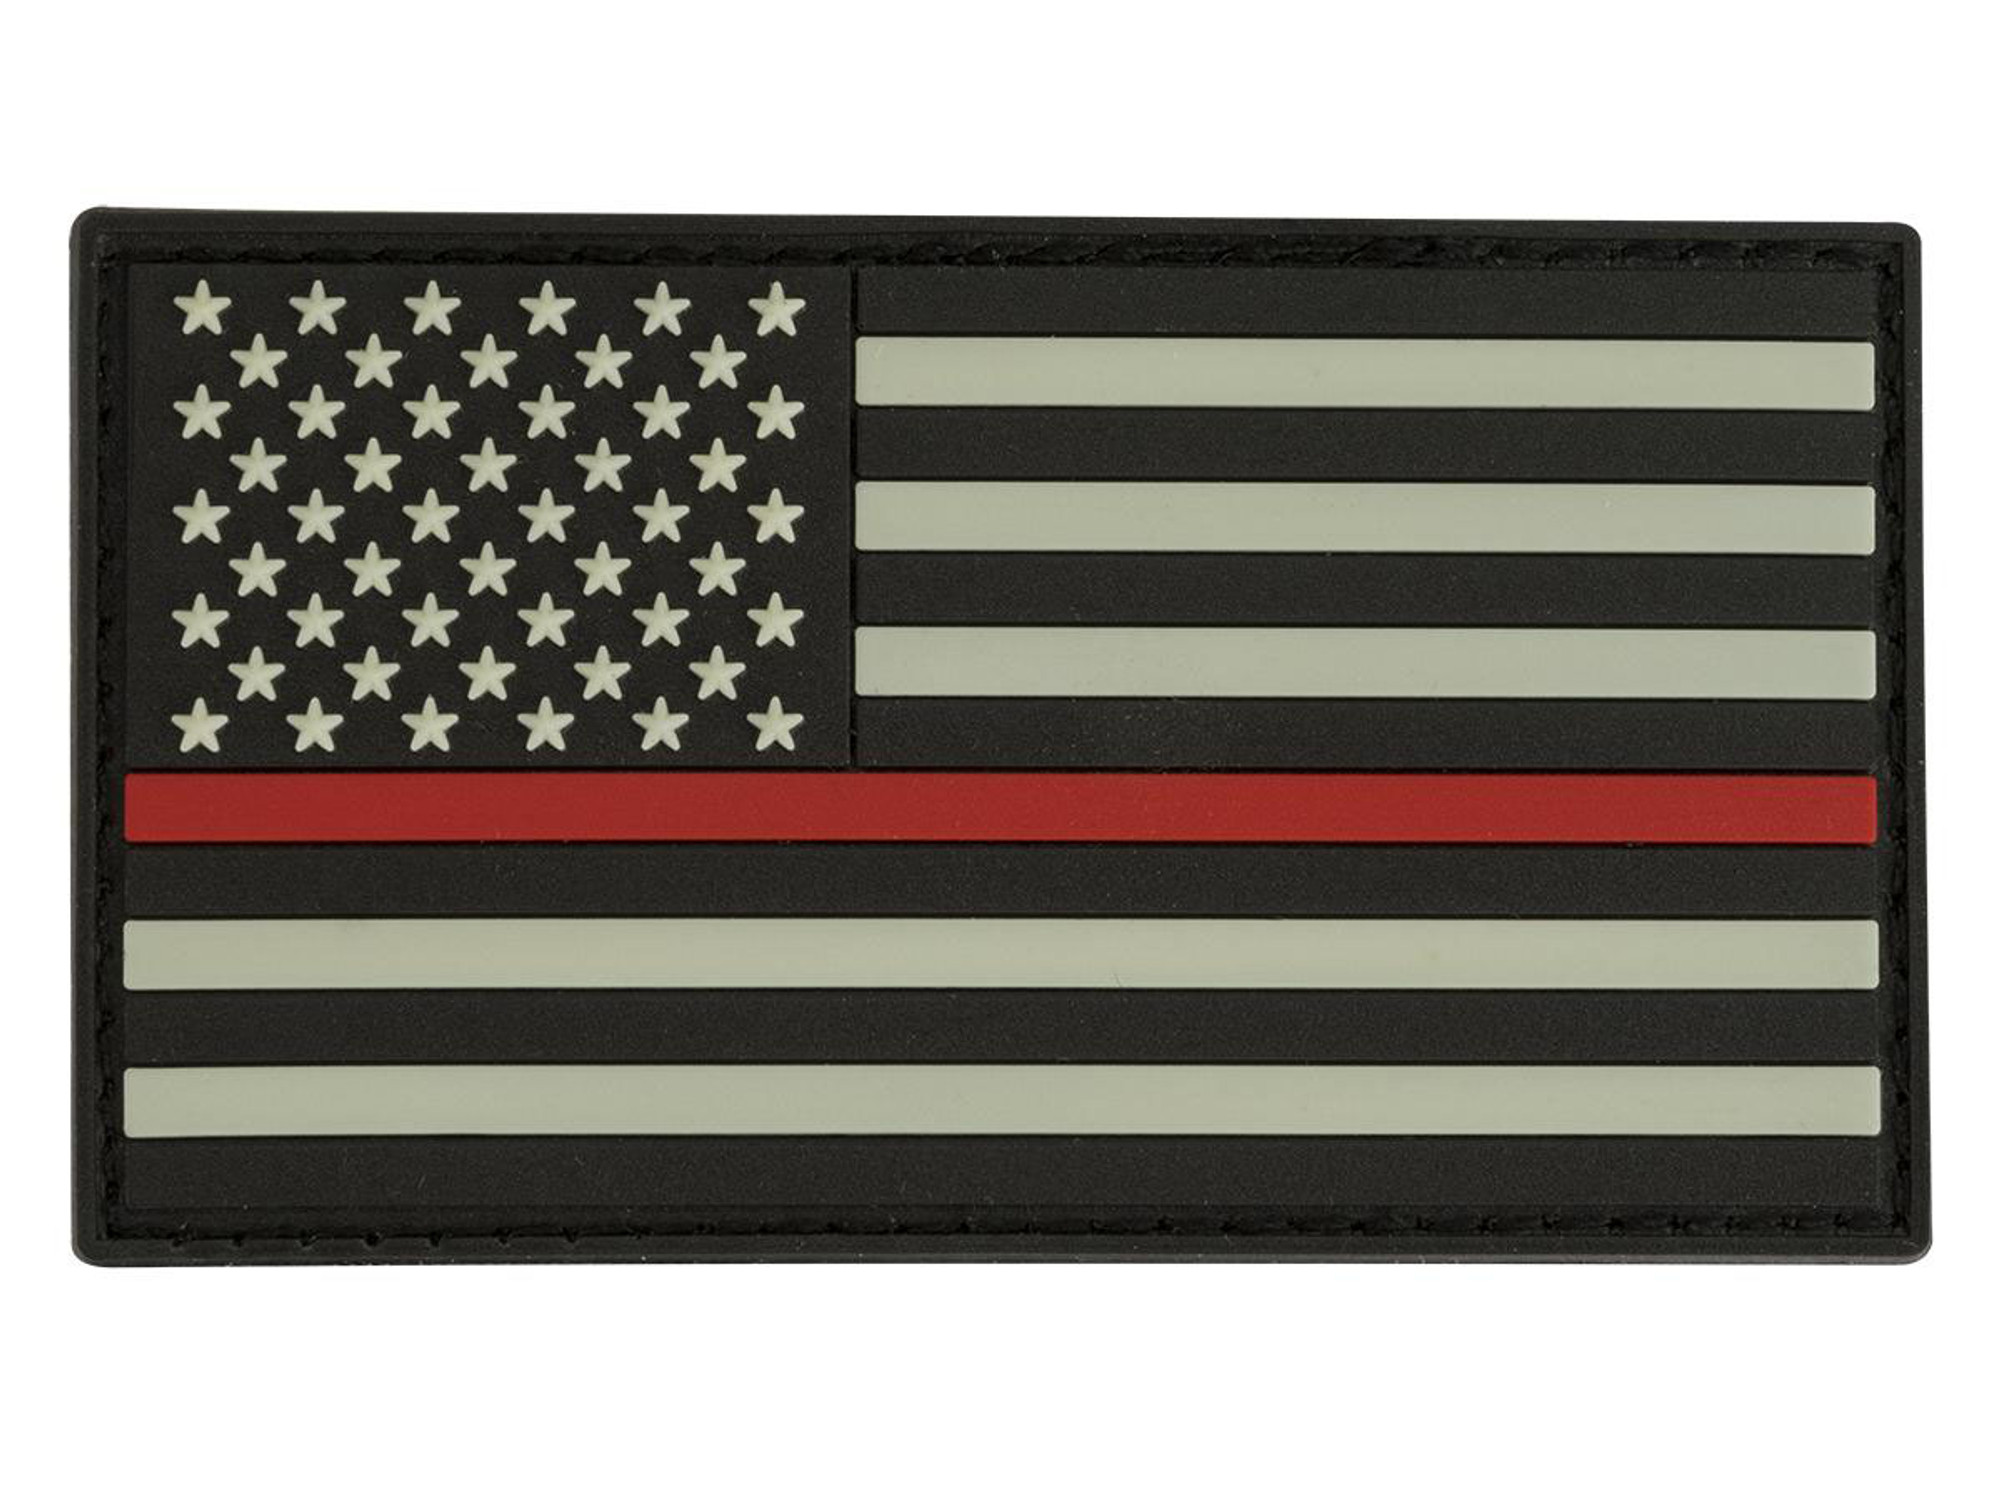 Glow in the Dark PVC Thin Red Line American Flag Patch